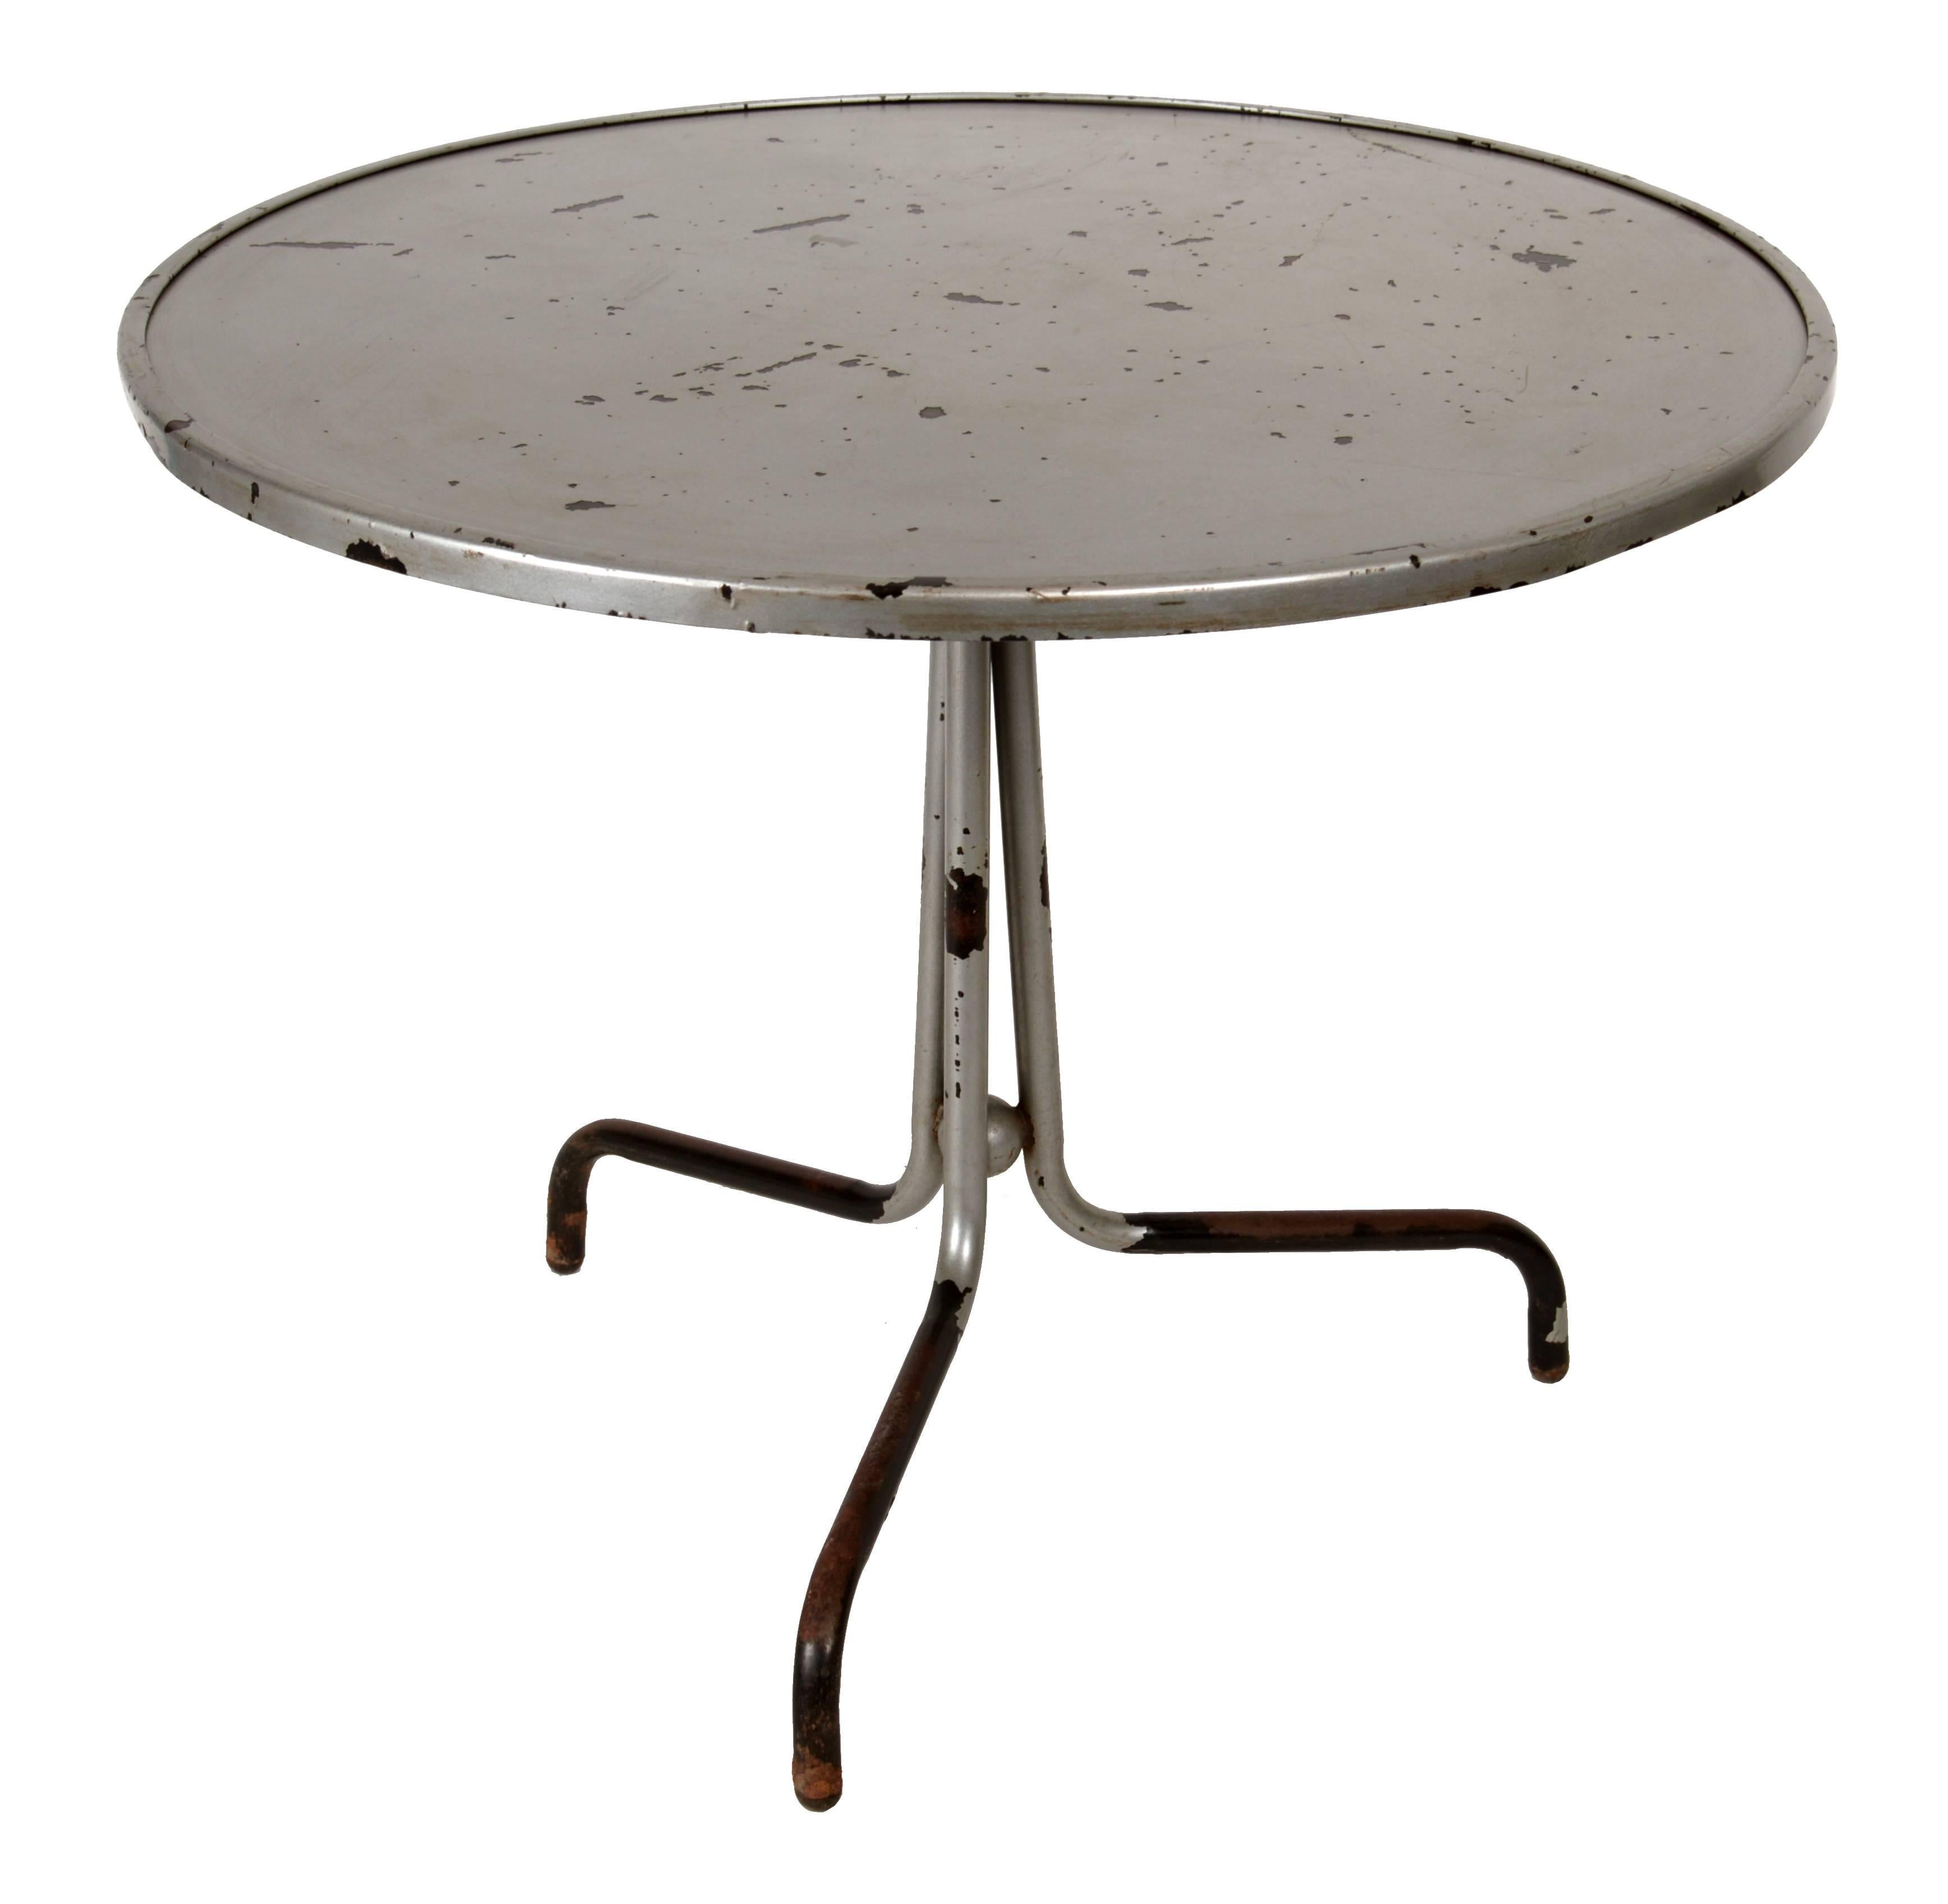 Round Silver Painted Side Table